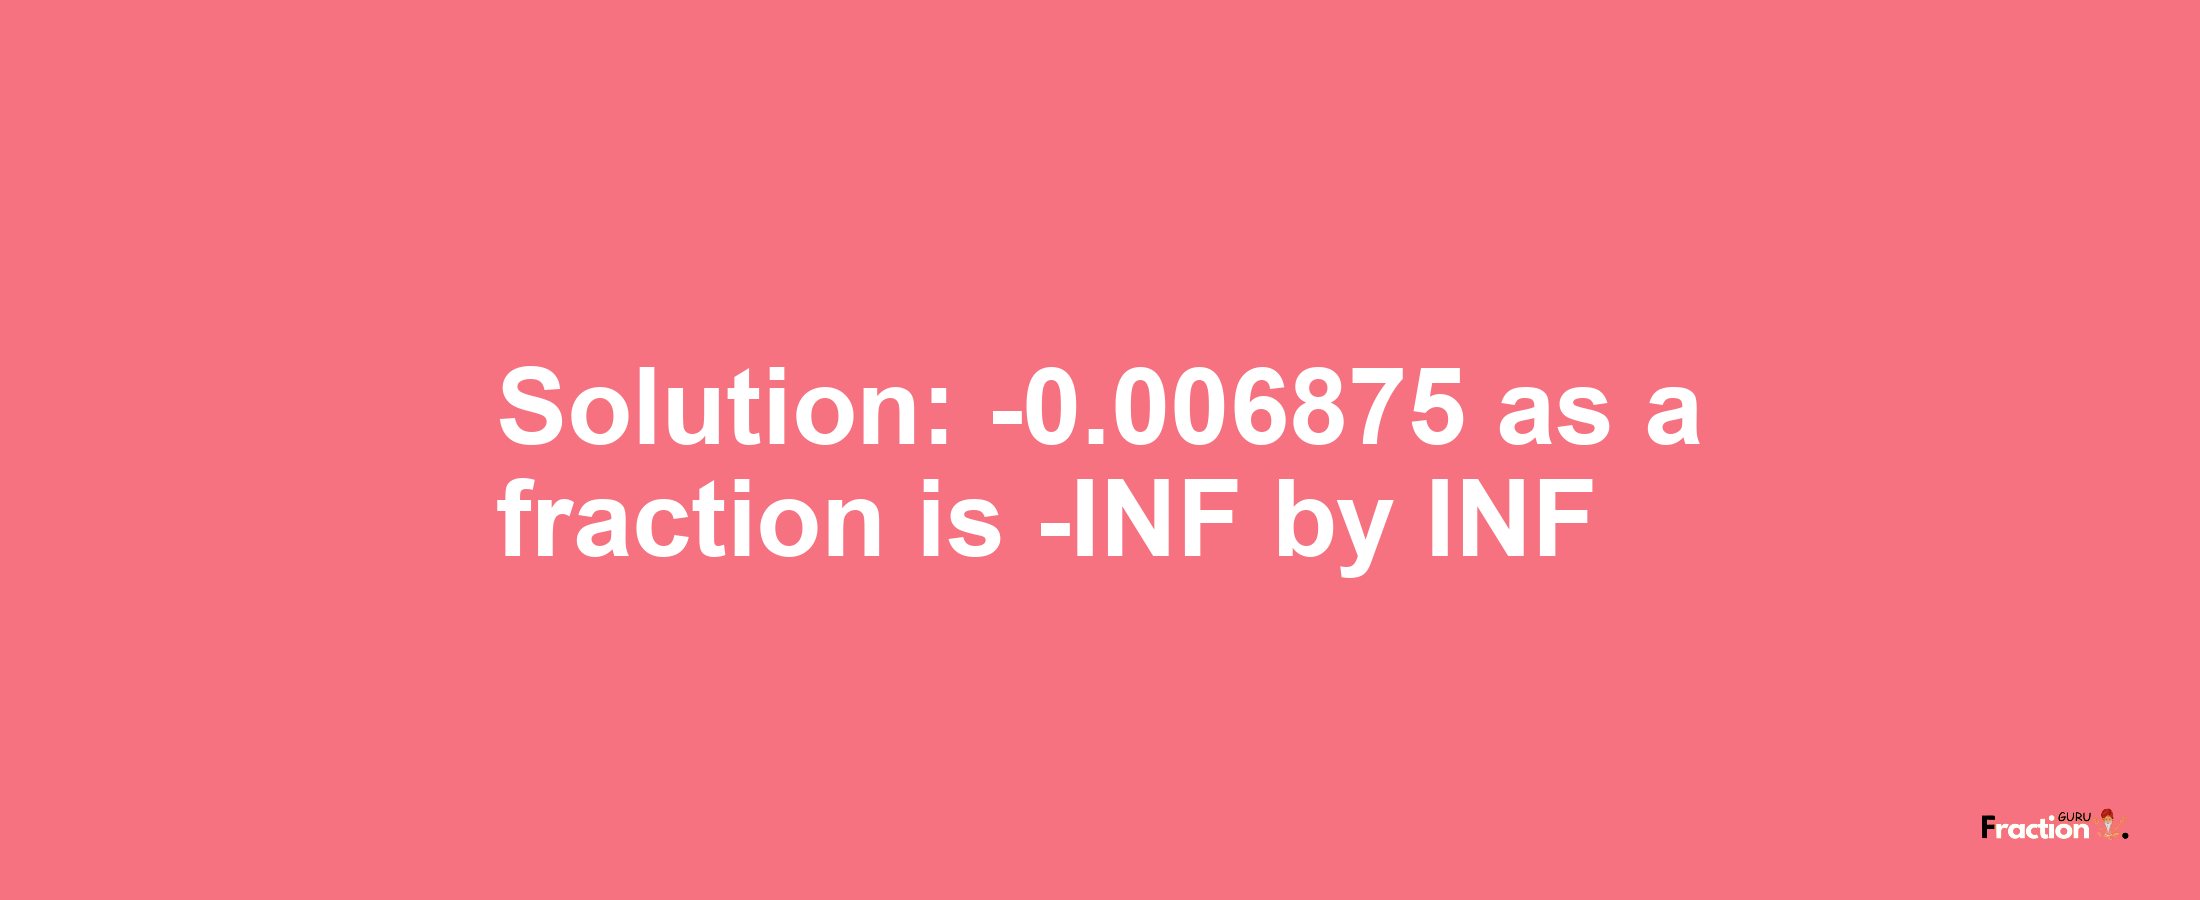 Solution:-0.006875 as a fraction is -INF/INF